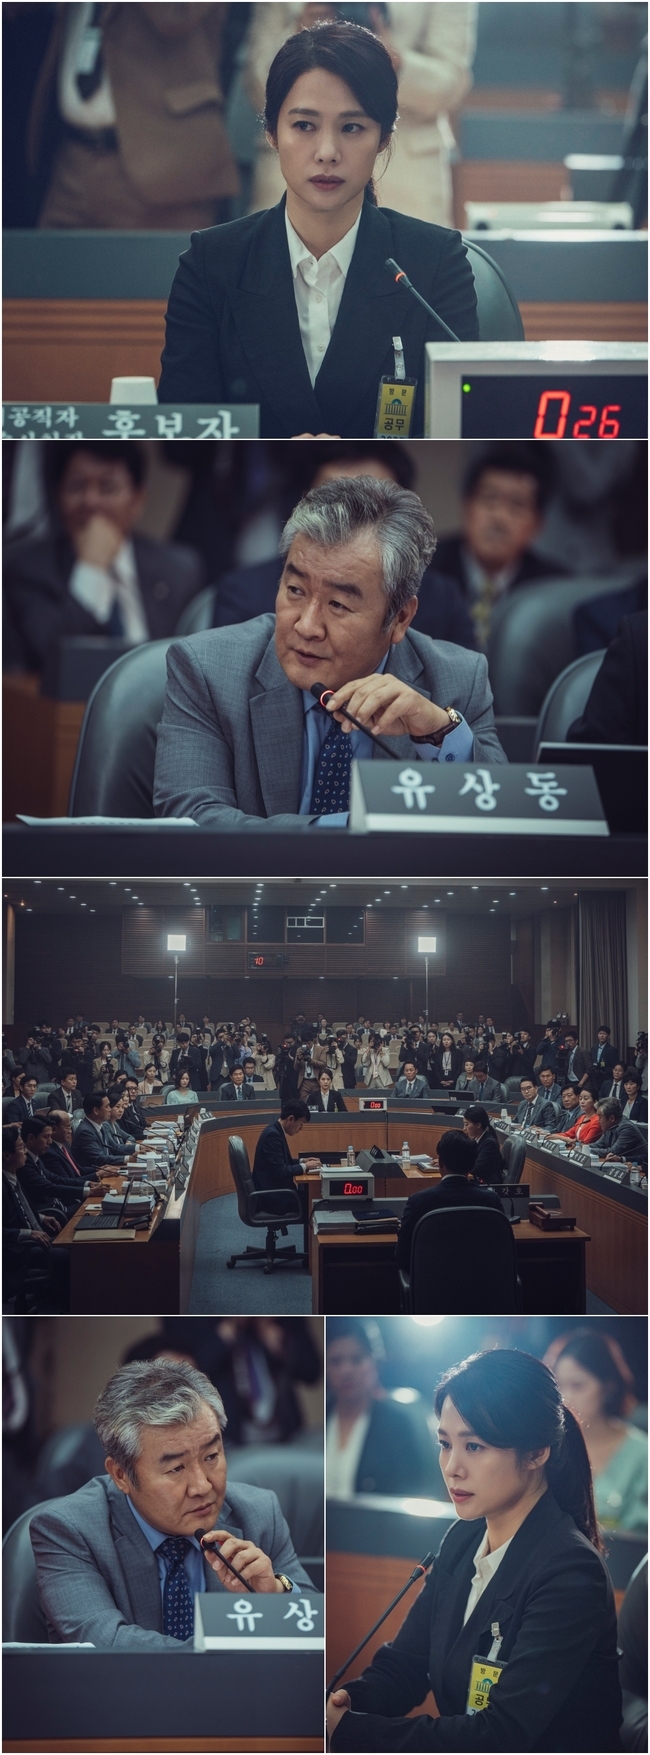 Kim Hyun-joos airborne chief candidate hearing beginsOn May 6, JTBC gilt drama Undercover (playplayplay by Song Ja-hoon, Baek Cheol-hyun/directed Song Hyun-wook) unveiled the scene of the hearing of the candidate for the head of the airborne office (high-ranking official criminal investigation office) of Choi Yeon-su (Kim Hyun-joo).Choi Yeon-su, who is on the bench of fate, and Yoo Sang-dong (Son Jong-hak), who is trying to pull him down, create a tense tension.In the last broadcast, Limited Express (Ji Jin-hee) was destined to cheat Choi Yeon-su to protect his secrets and familys happiness.Limited Express doubted the ID copy of Lee Seok-gyu and the account of the name of the name in the flowerpot business document left by Cha Min-ho (Men Sung-jin), and began to dig it out without his wife knowing it.Meanwhile, Choi Yeon-su was hit directly by the assault of his son Seung-gu (Yoo Sun-ho).However, the victim Kim Dae-kyungs statement overturned the public opinion, and Choi Yeon-su was confirmed as an airborne chief candidate.In the meantime, Choi Yeon-su takes a meaningful first step toward the first airborne chief: being a candidate and being a hearing to verify his qualities and abilities.Even in the atmosphere of the ice sheet, Choi Yeon-sus resolveful eyes catch the eye.Choi Yeon-su, who knows better than anyone that it is a heavy position, not a high position. After a long time of trouble, he accepted the candidate proposal with a great sense of responsibility and mission.Choi Yeon-su has been following justice and belief. Attention is focused on whether hearing free pass is possible.Choi Yeon-su is also tough to face, and in the ensuing photo, Yoo Sang-dong (Son Jong-hak), a member of parliament who is in the Choi Yeon-su sniper, feels a lot of room.Yoo Sang-dong is a prosecutor in charge of the case of Hwang Jung-ho (Choi Kwang-il) and a person with a secret connection with Lim Hyung-rak (Heo Jun-ho), who disapproves of Choi Yeon-su, a human rights lawyer from the activist movement.I guess the day-line attack to stop Choi Yeon-su: Can Choi Yeon-su go through a tight thorny field and do what he meant?Choi Yeon-su is also not a man to back down easily, with expectations drawn to what kind of counterattack he will launch against his indiscriminate attack.